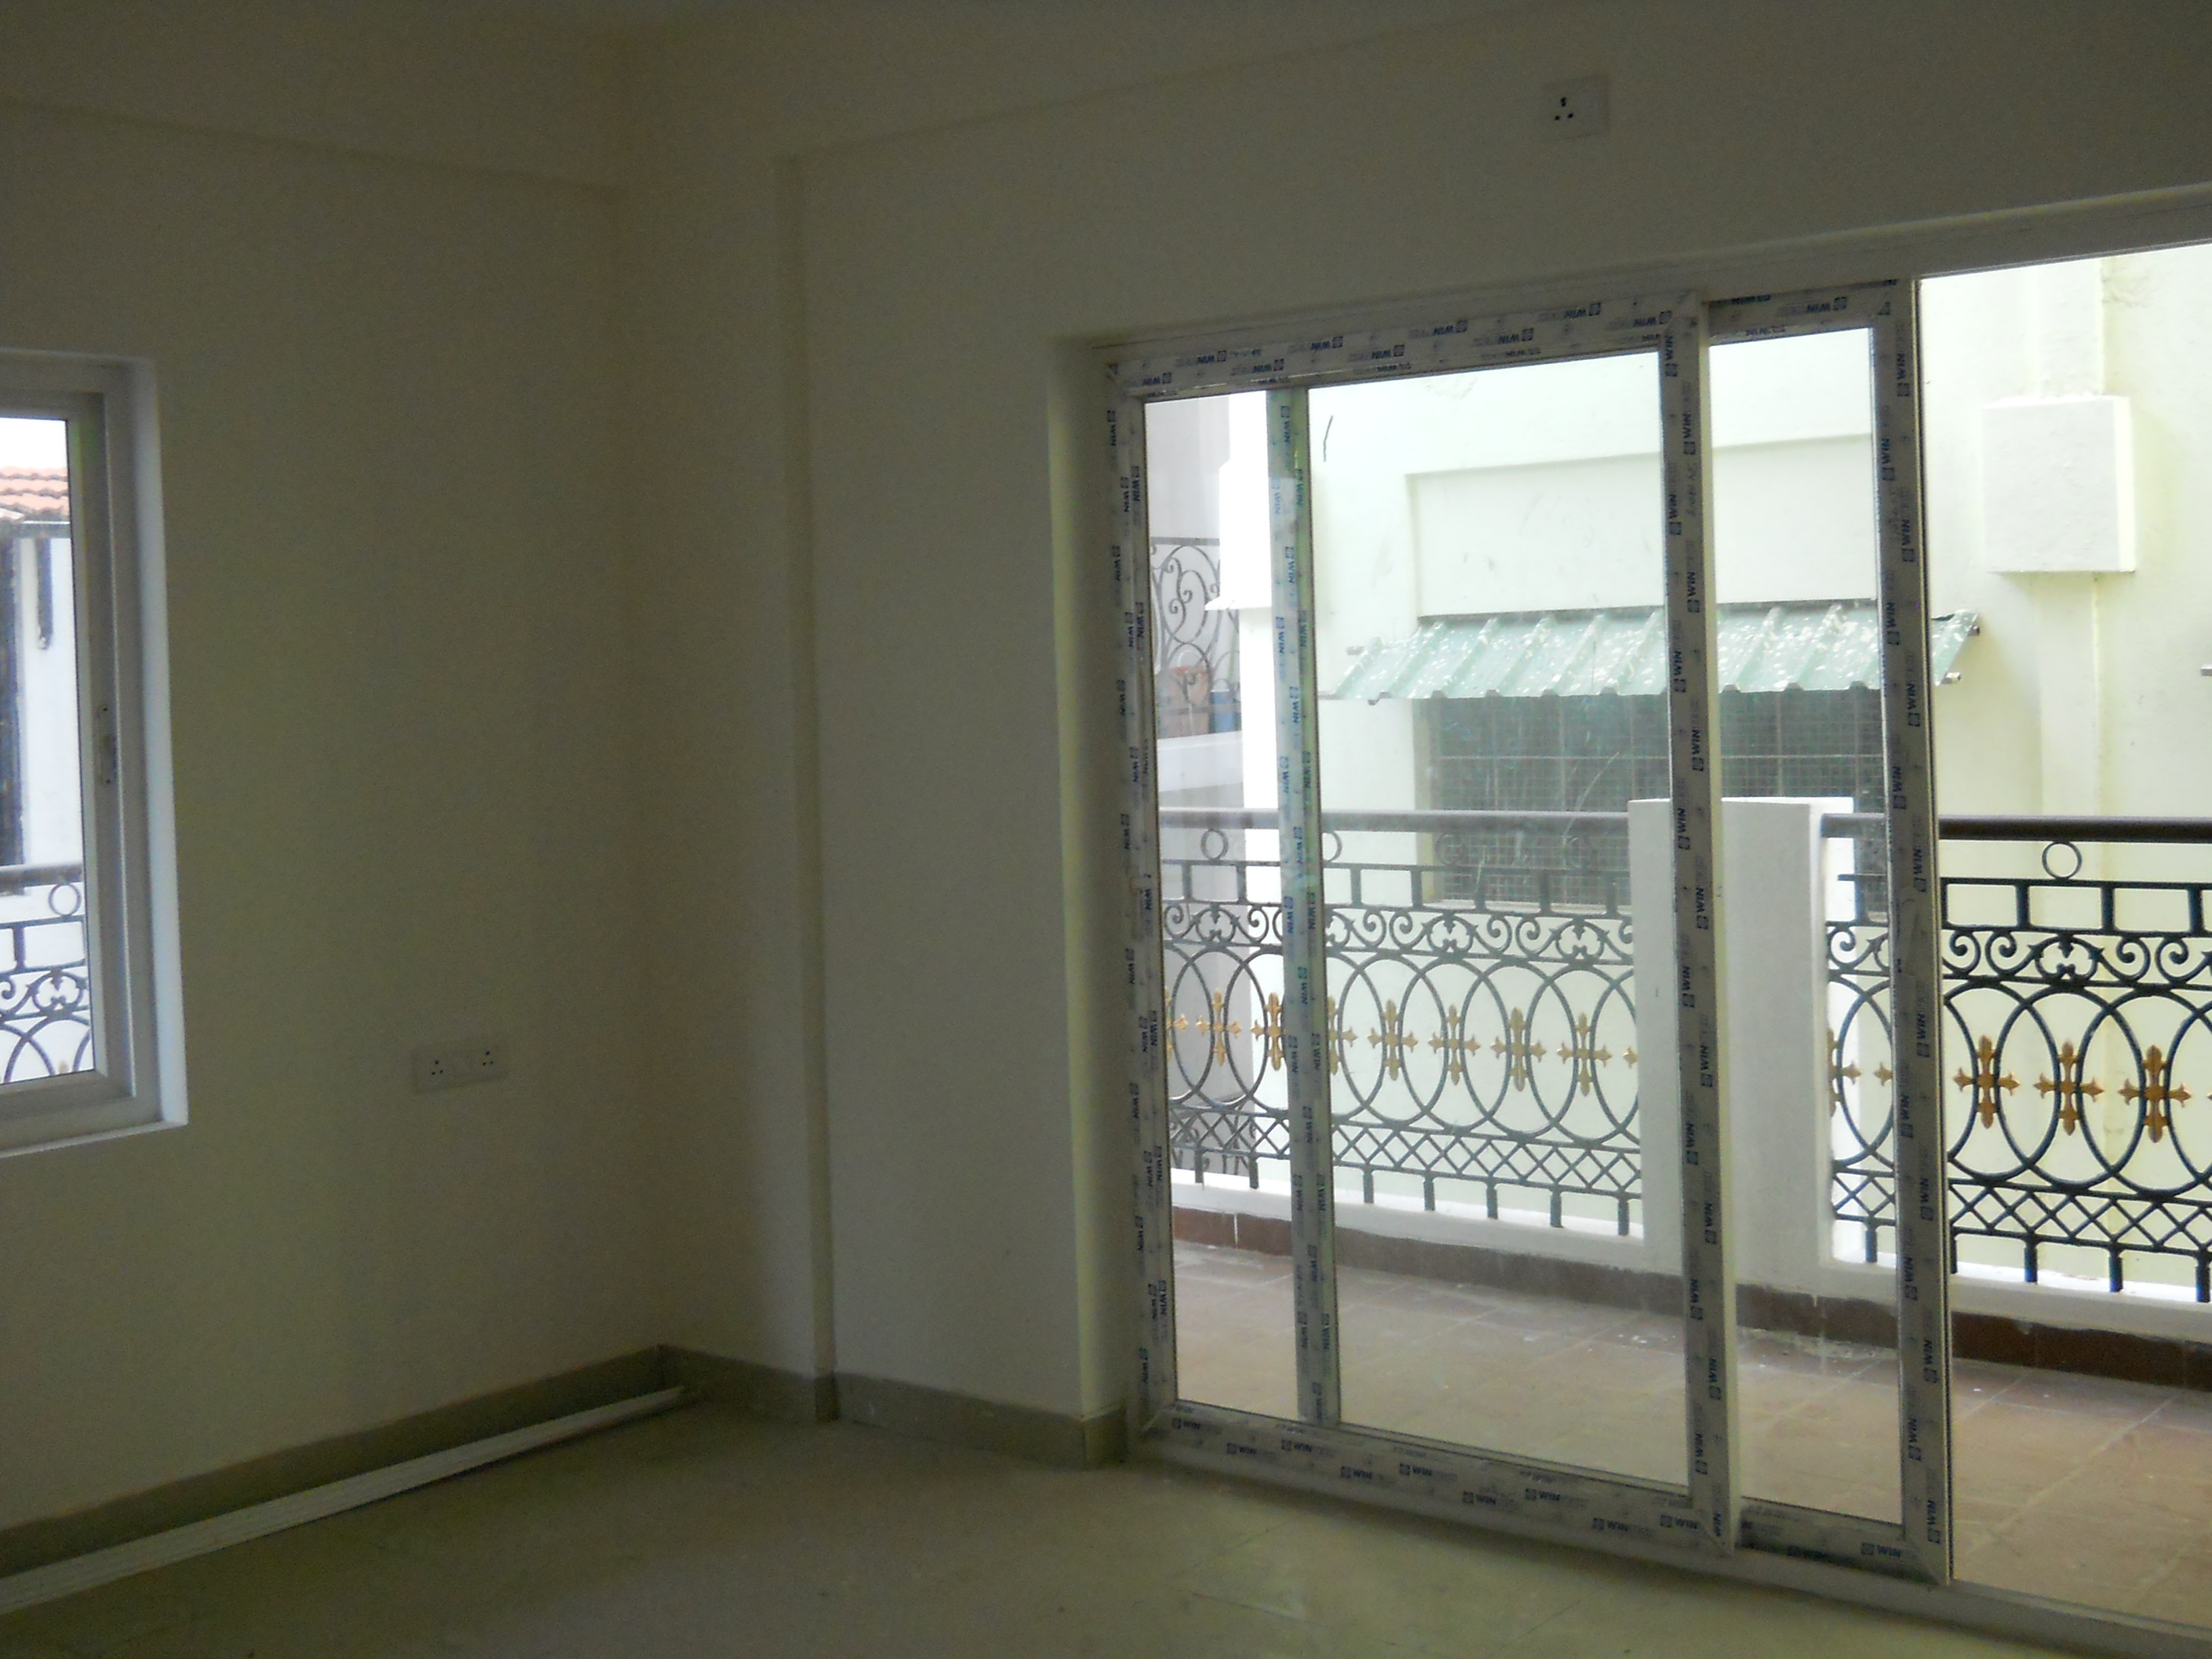 BENSON TOWN: Exclusive 3 bedrooms flat for sale